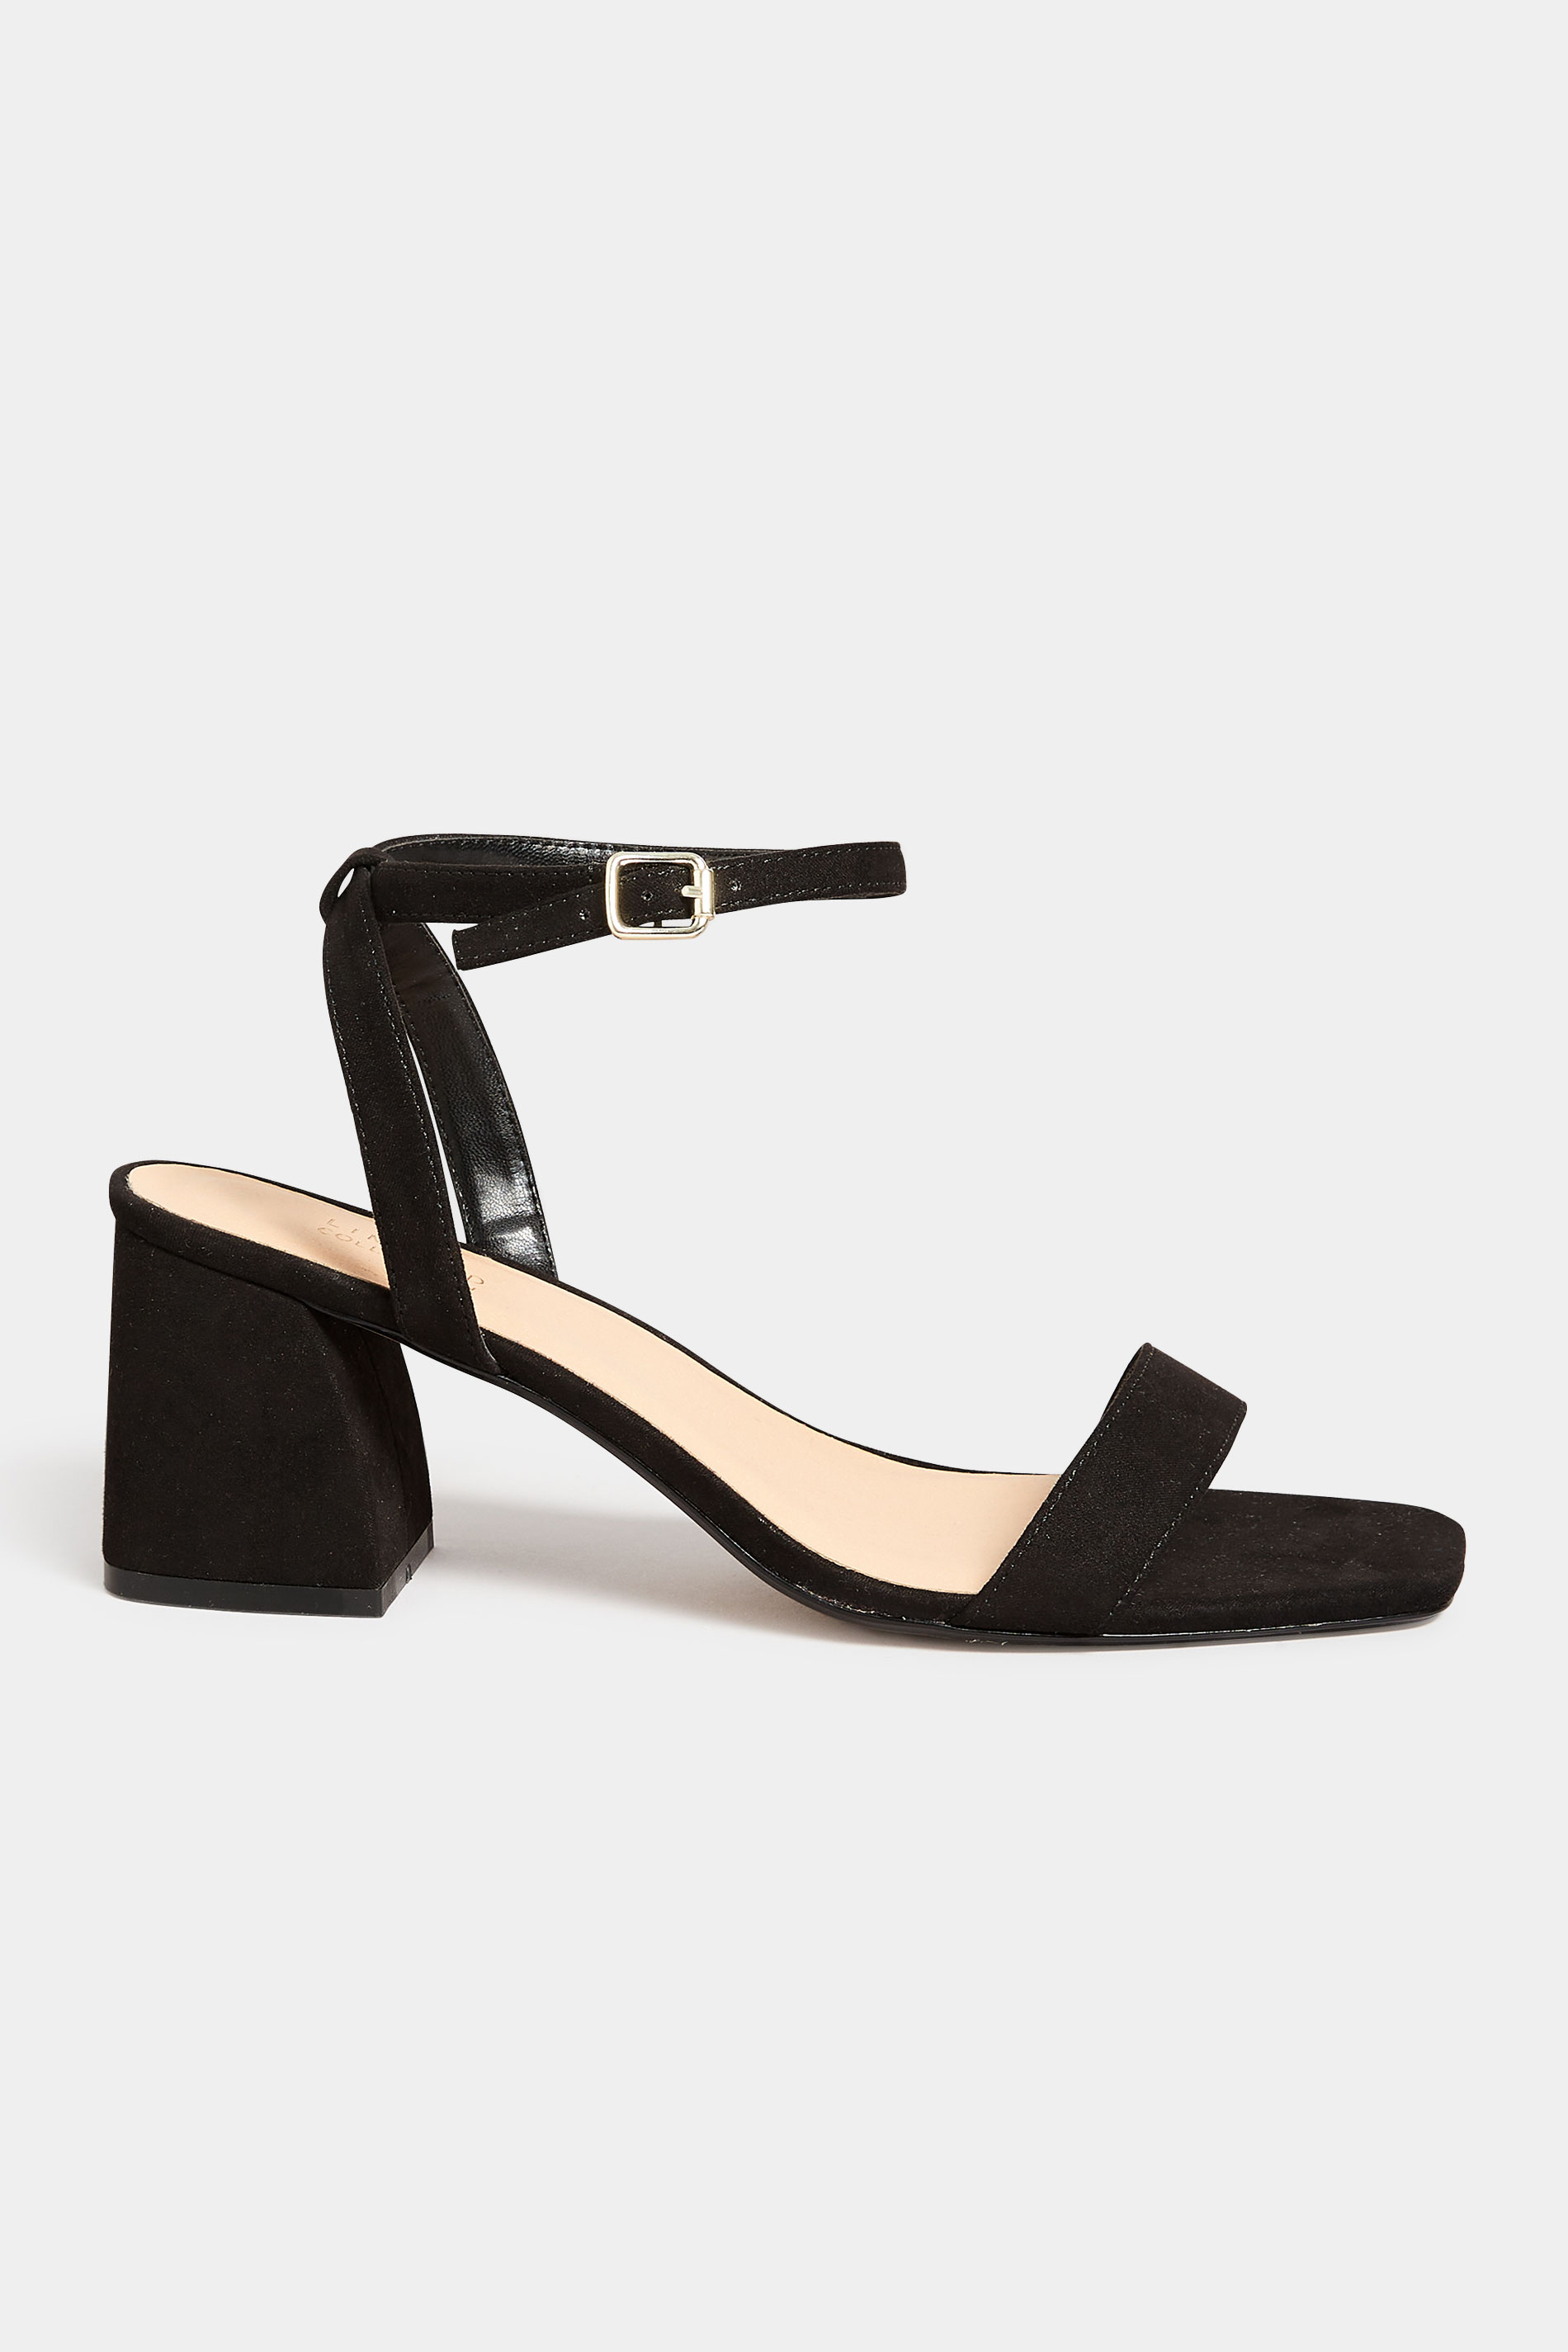 LIMITED COLLECTION Black Block Heeled Sandal In Wide E Fit & Extra Wide EEE Fit | Yours Clothing 3